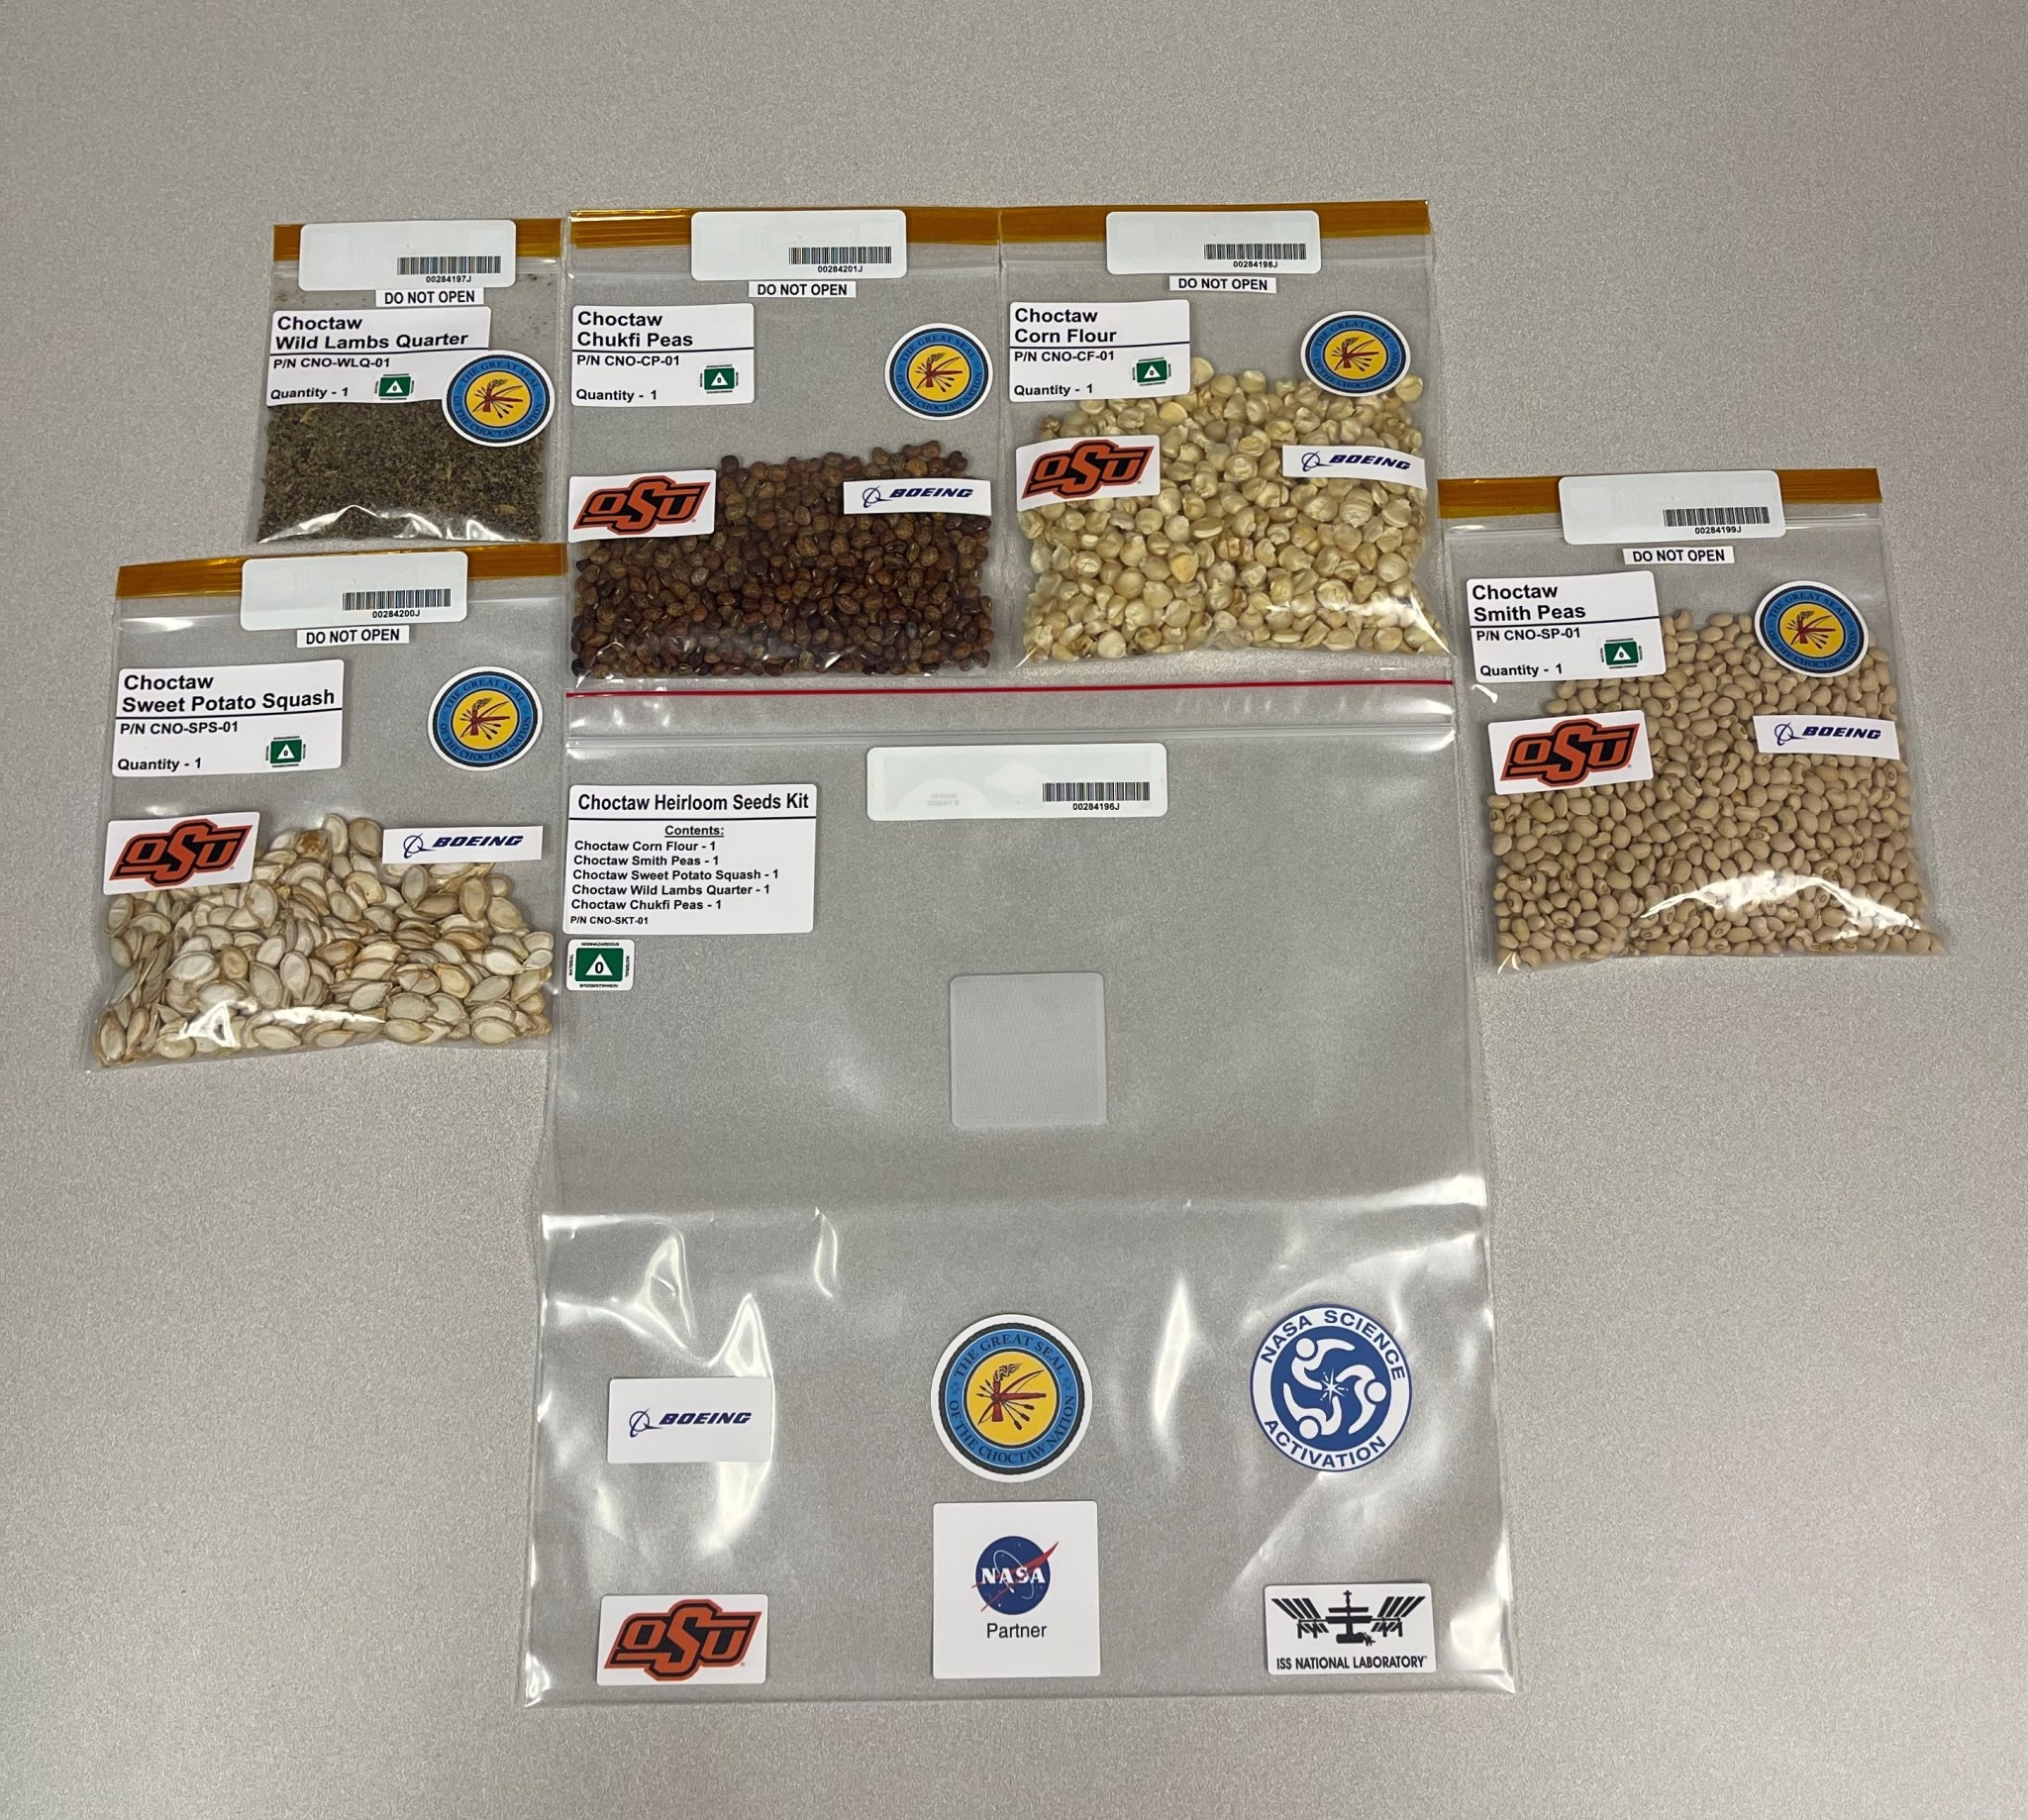 Five clear bags of Choctaw heirloom seeds feature Oklahoma State University and Boeing logo stickers and contain, from left to right, the following kinds of seeds: Sweet Potato Squash, Wild Lambs Quarter, Chukfi Peas, Corn Flour, and Smith Peas. The seeds vary in size, shape, color, and texture, from small, smooth, round, and tan in color, to tiny, rough, teardrop-shaped, and black in color. Below these five bags is a clear bag that will hold them all. This larger bag features the NASA Partner, NASA Science Activation, ISS National Laboratory, The Great Seal of the Choctaw Nation, Boeing, and Oklahoma State University logo stickers.